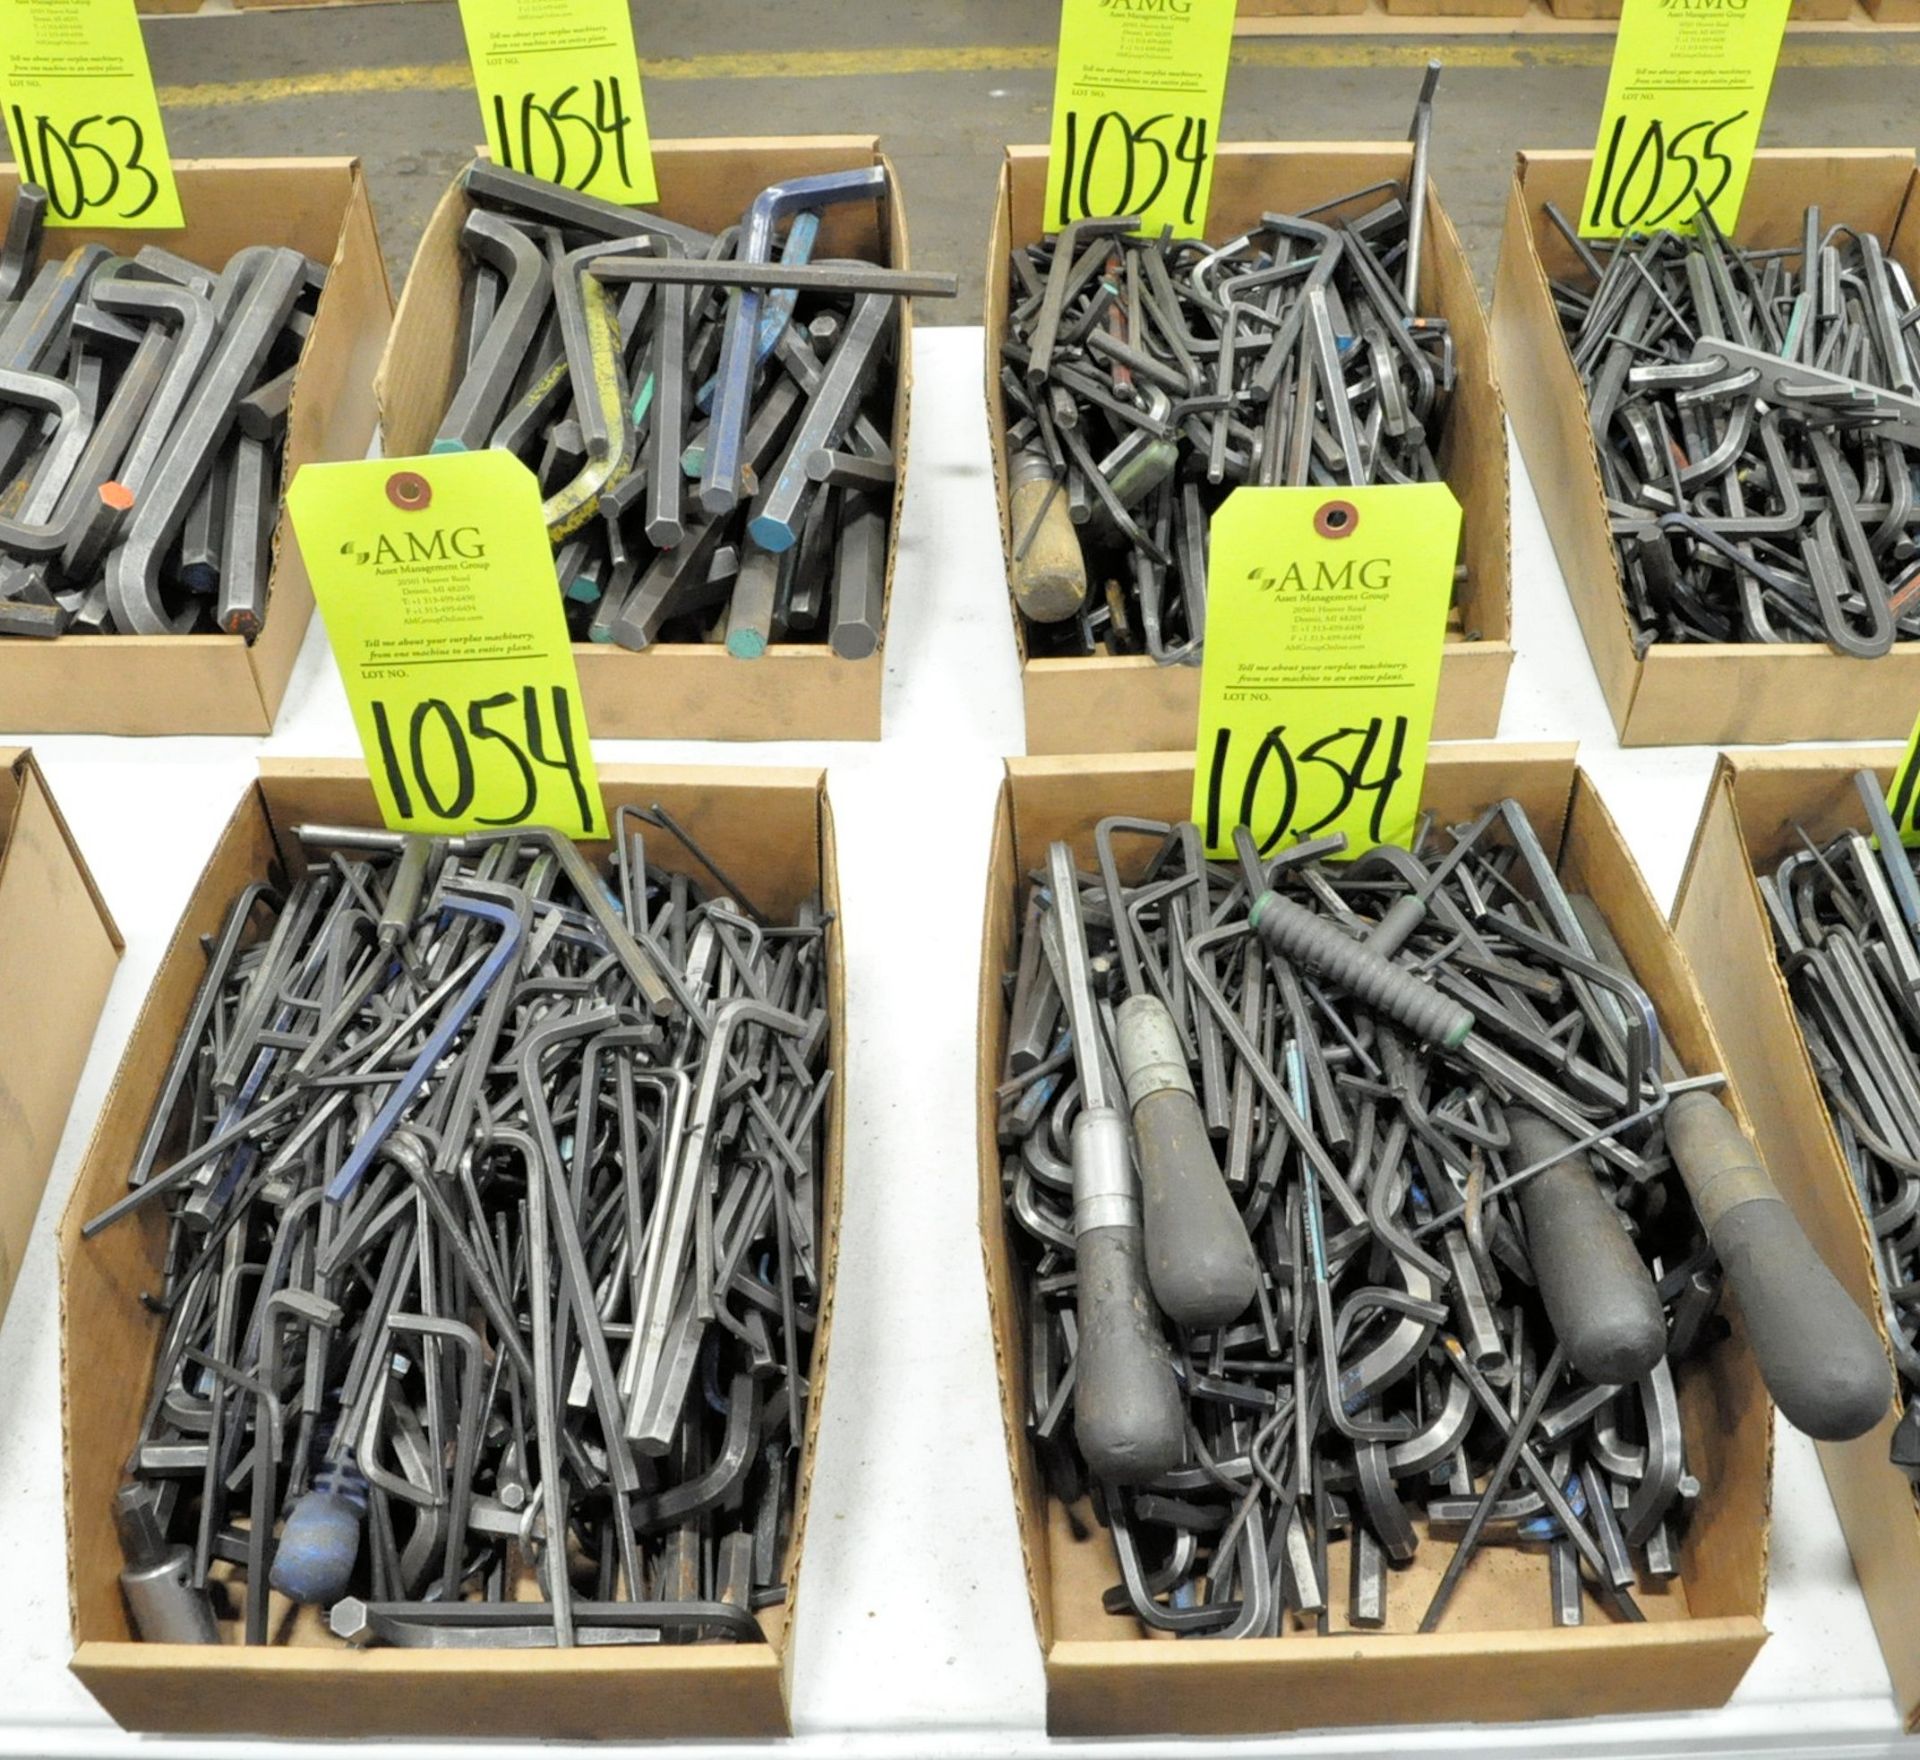 Lot-Asst'd Allen Wrenches in (4) Boxes, (E-7), (Yellow Tag)